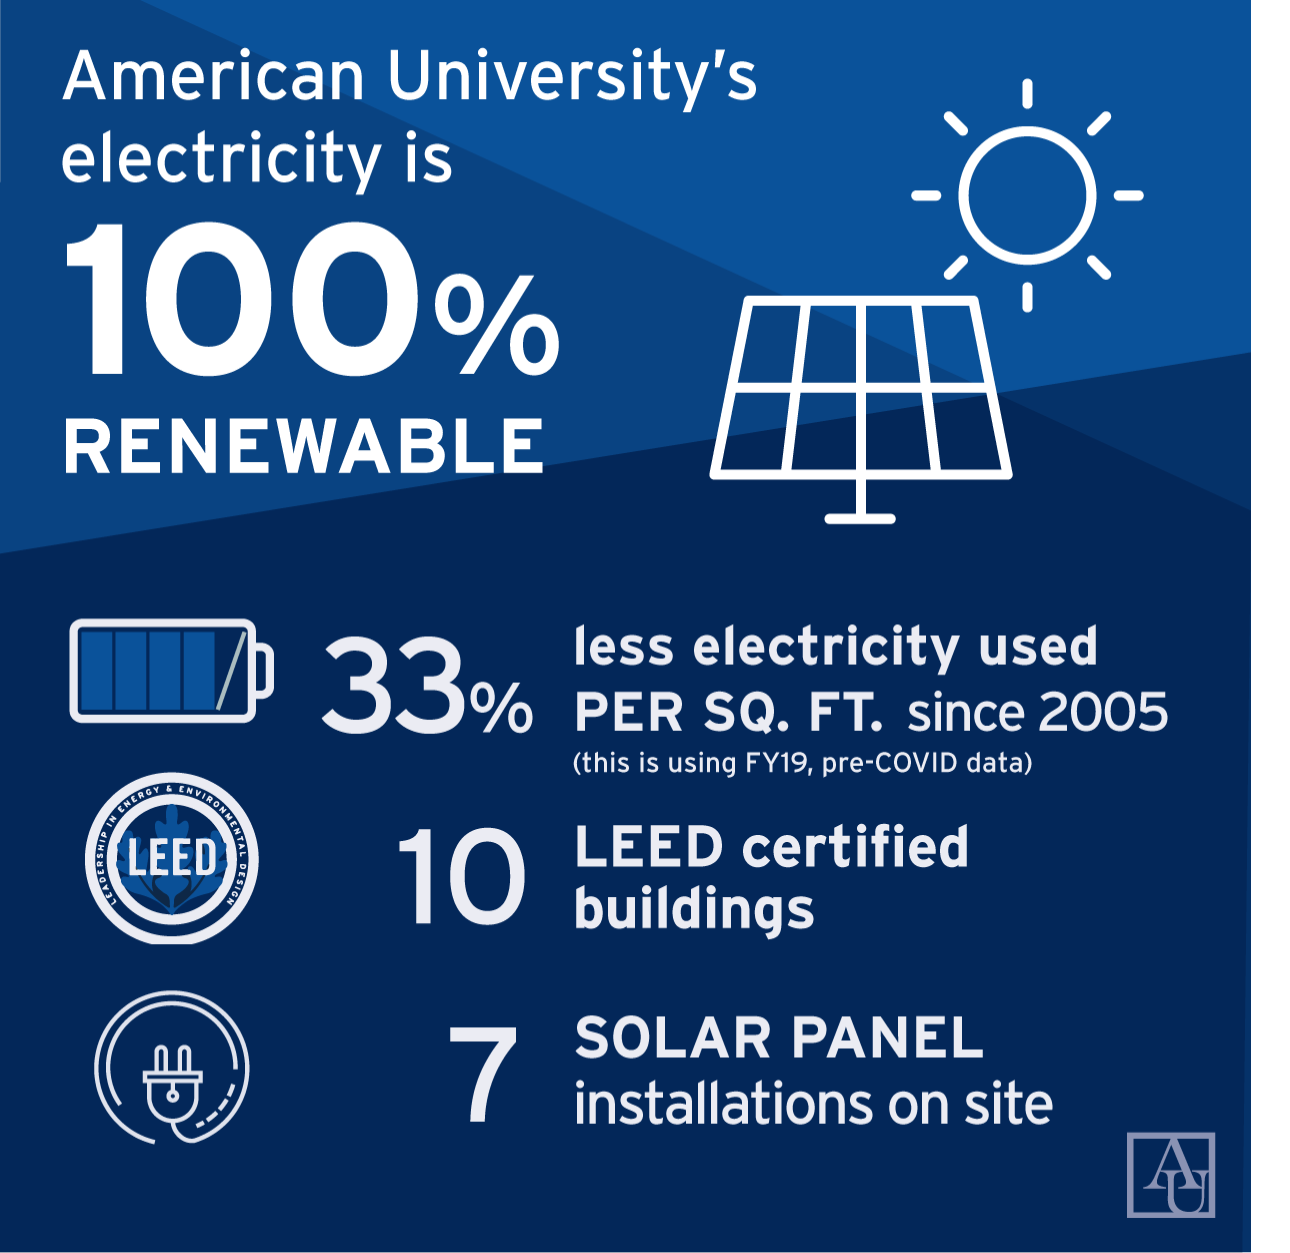 AU's electricity comes from 100% renewable sources. 33% less electricity used per sq. ft. since 2005. 10 LEED certified buildings. 7 solar panel installations on site.